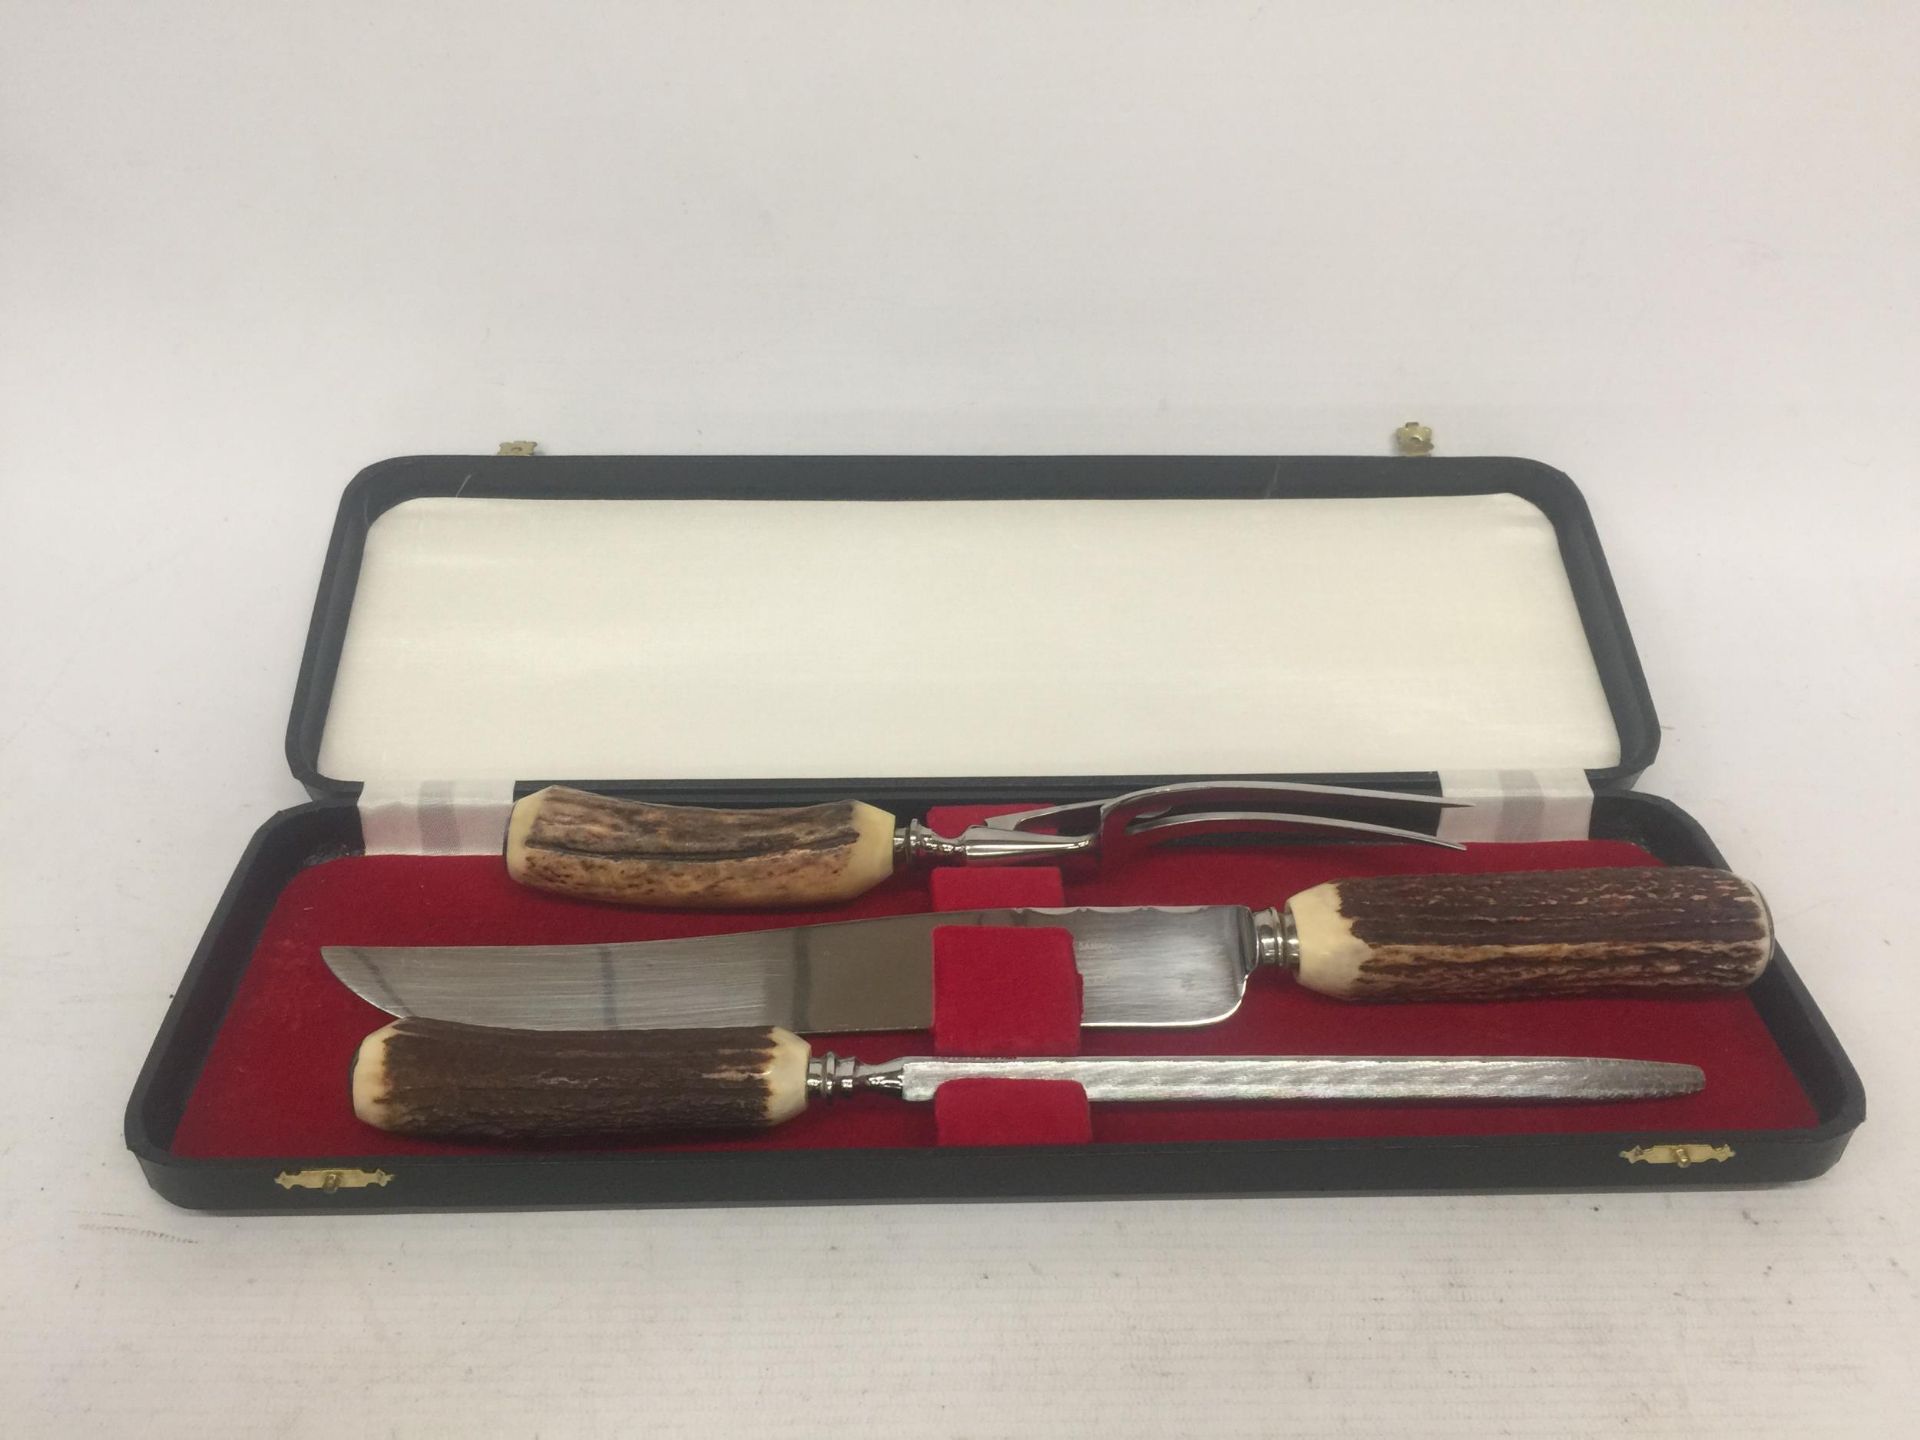 A BRIAN SAMPSON ANTLER HANDLED THREE PIECE STAINLESS STEEL CARVING SET IN A PRESENTATION BOX